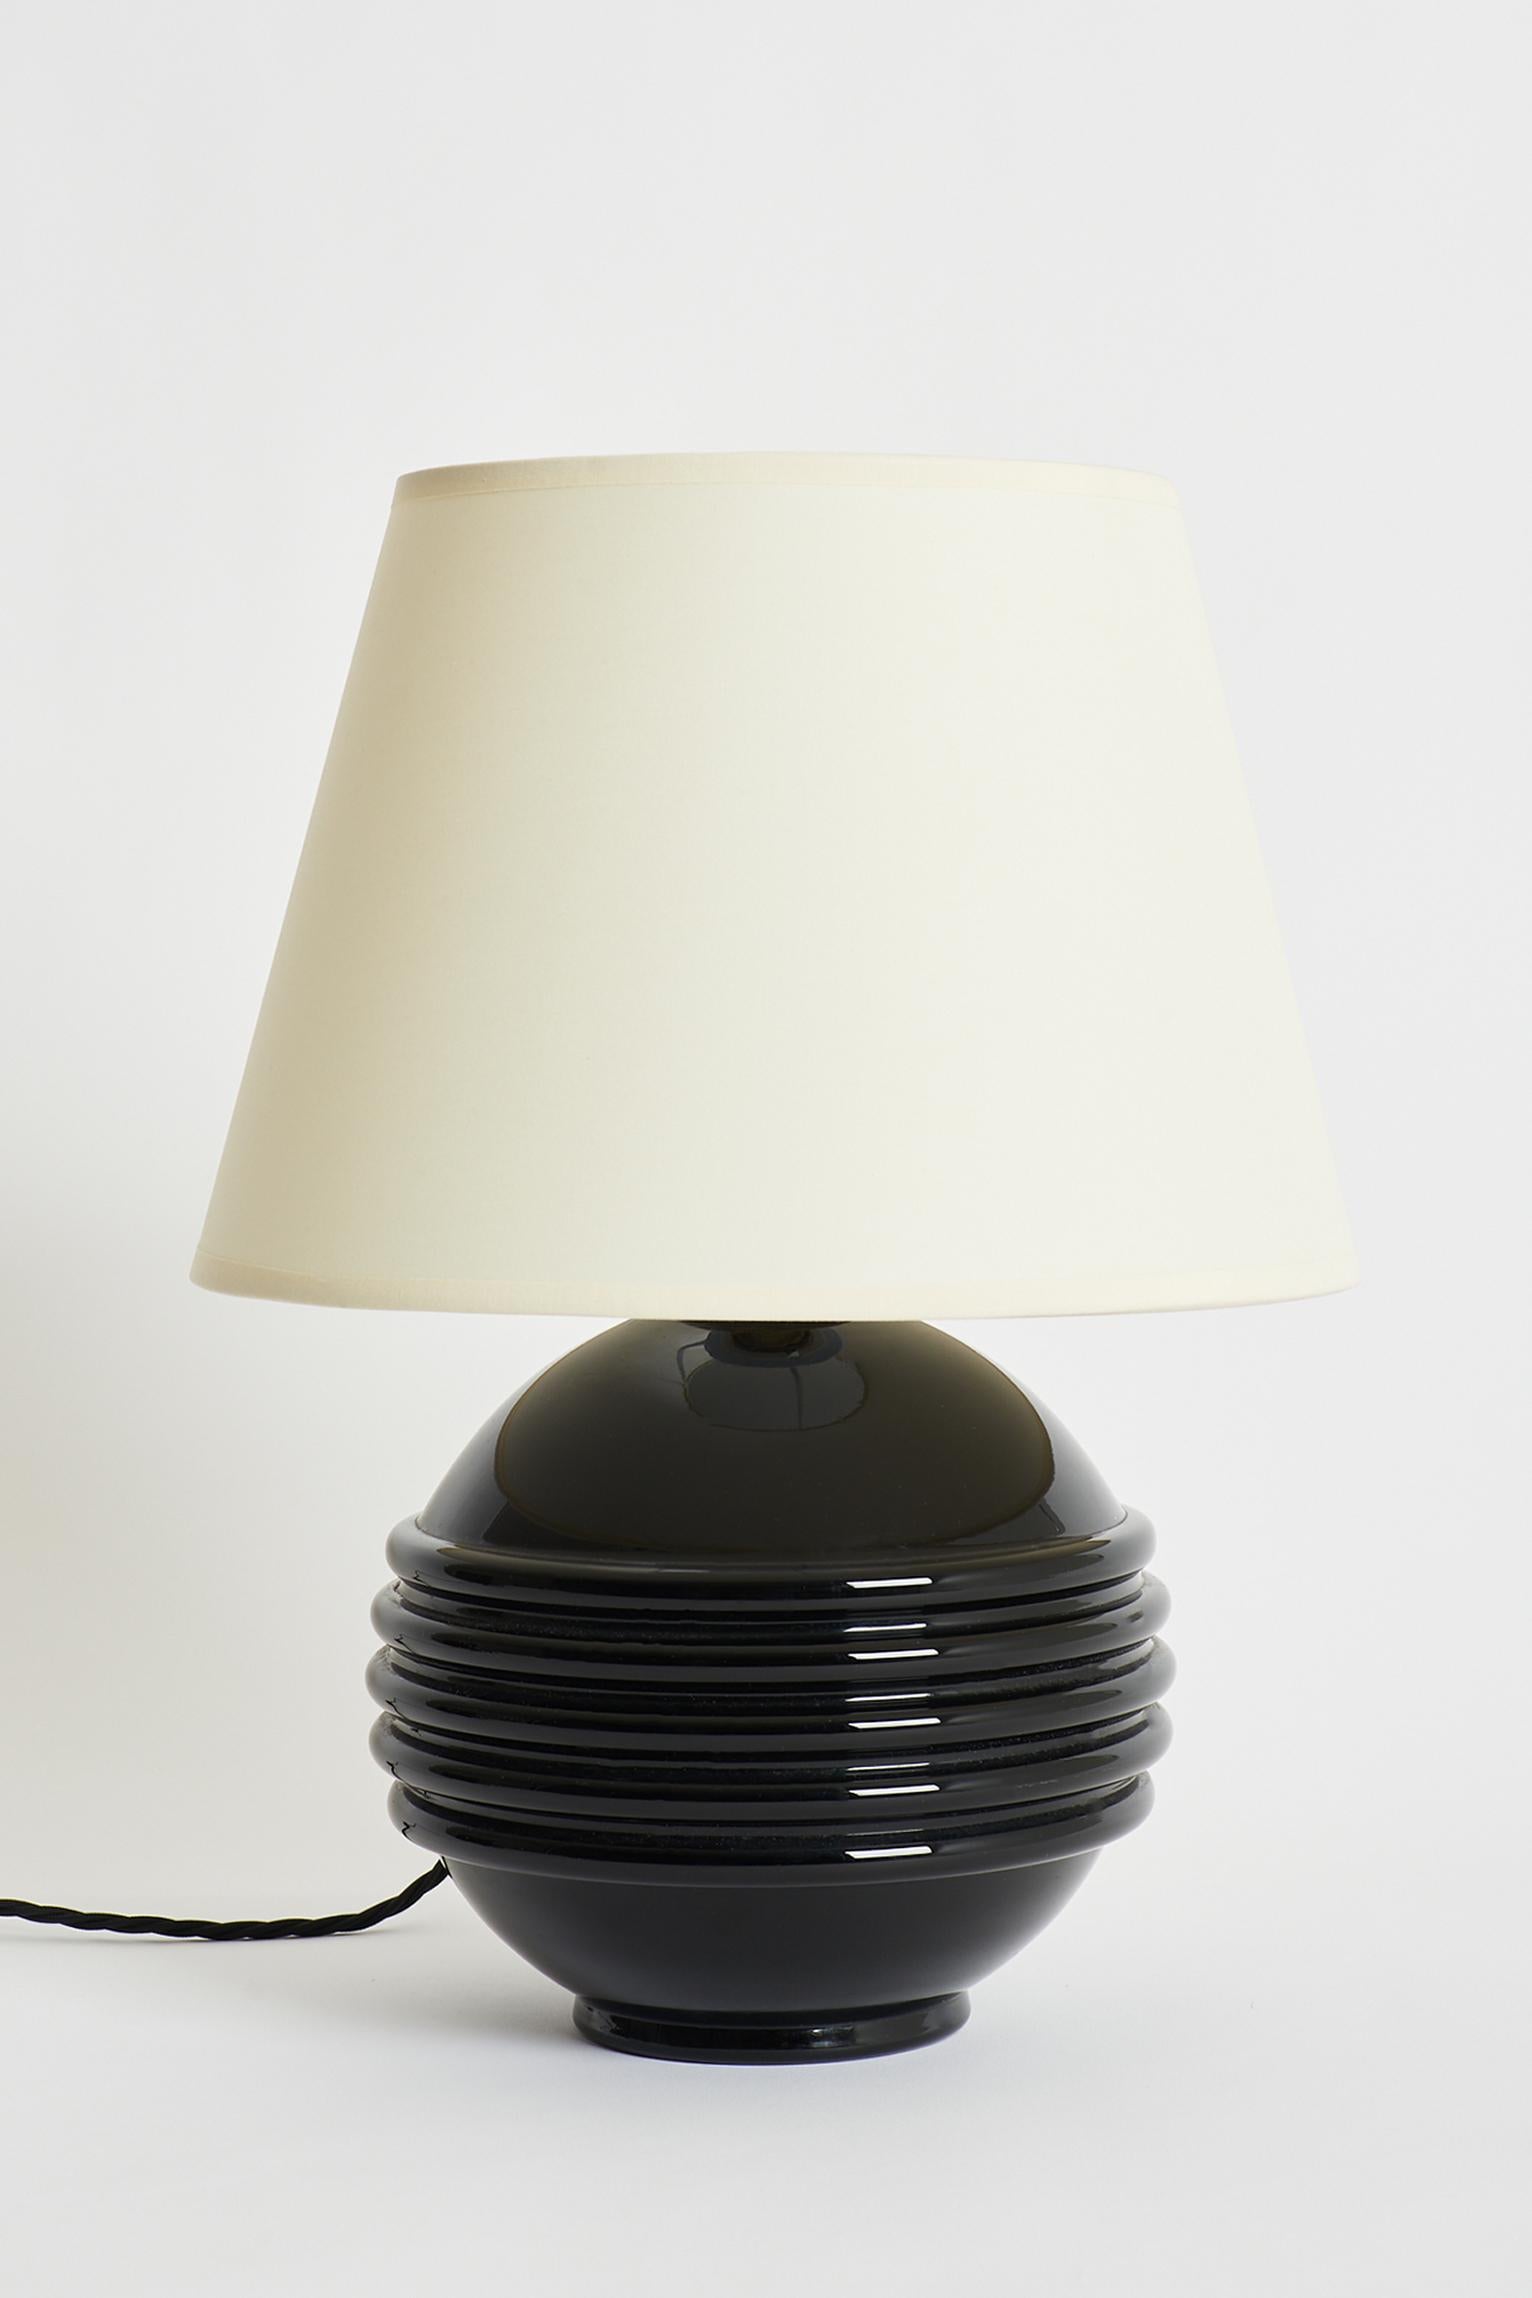 A pair of black opaline glass table lamps by Jacques Adnet (1901-1984).
France, Circa 1930.
Measures: With the shade: 43 cm high by 30 cm diameter.
Lamp bases only: 26 cm high by 21 cm diameter.